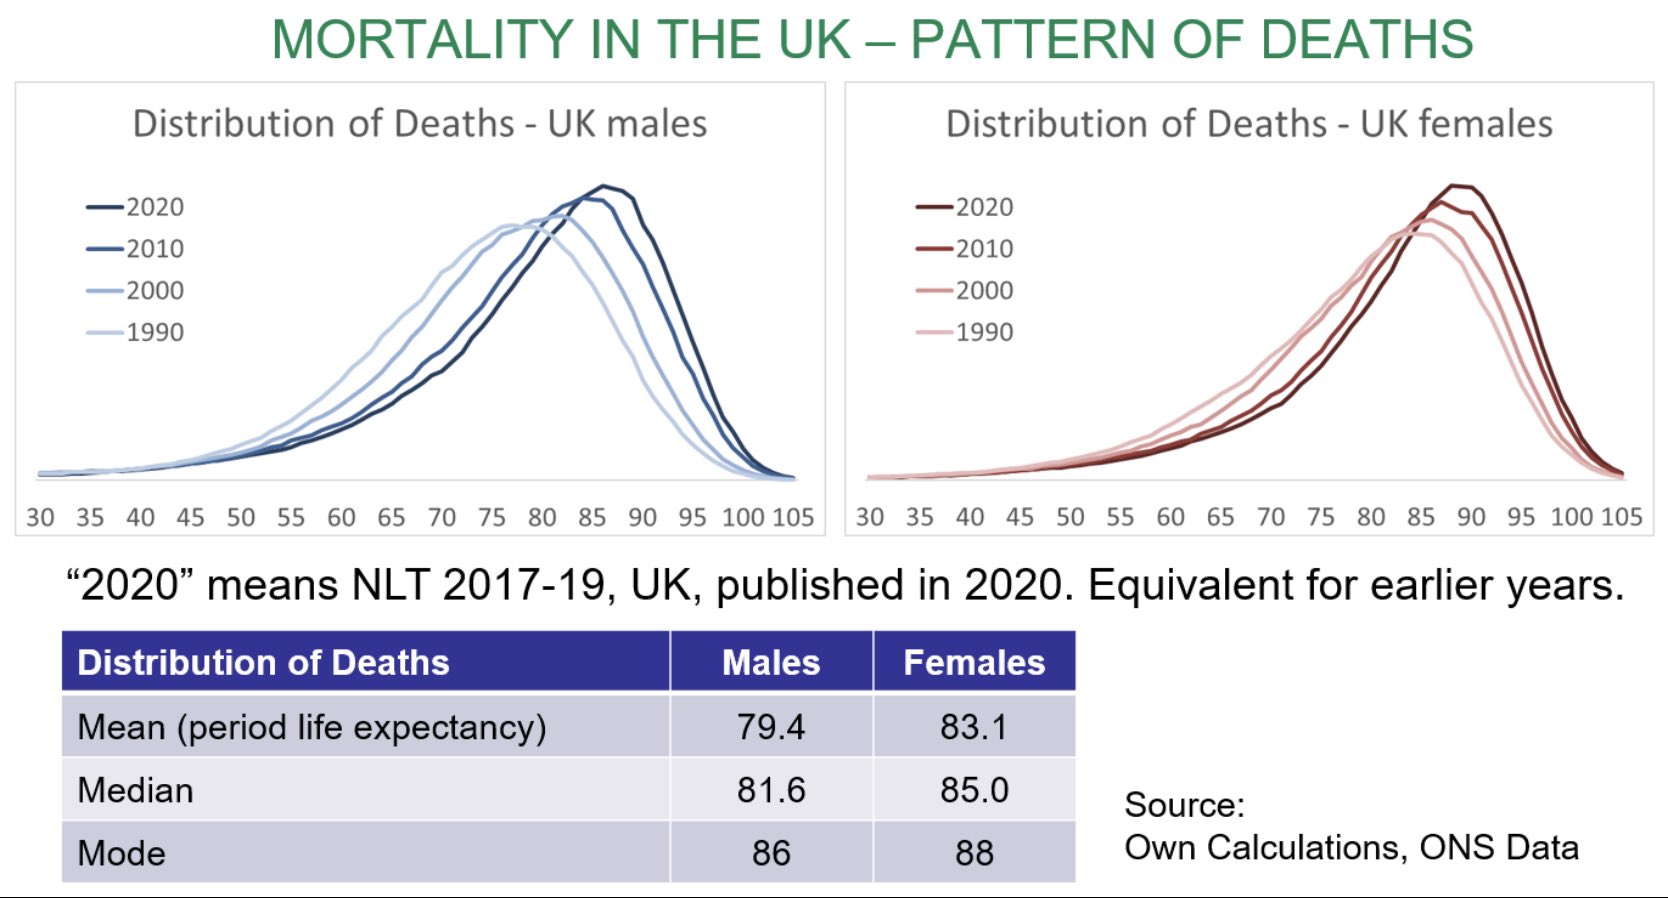 Images showing the age distribution of deaths and how that has changed as we live longer. A table shows mean, median and mode life expectancy